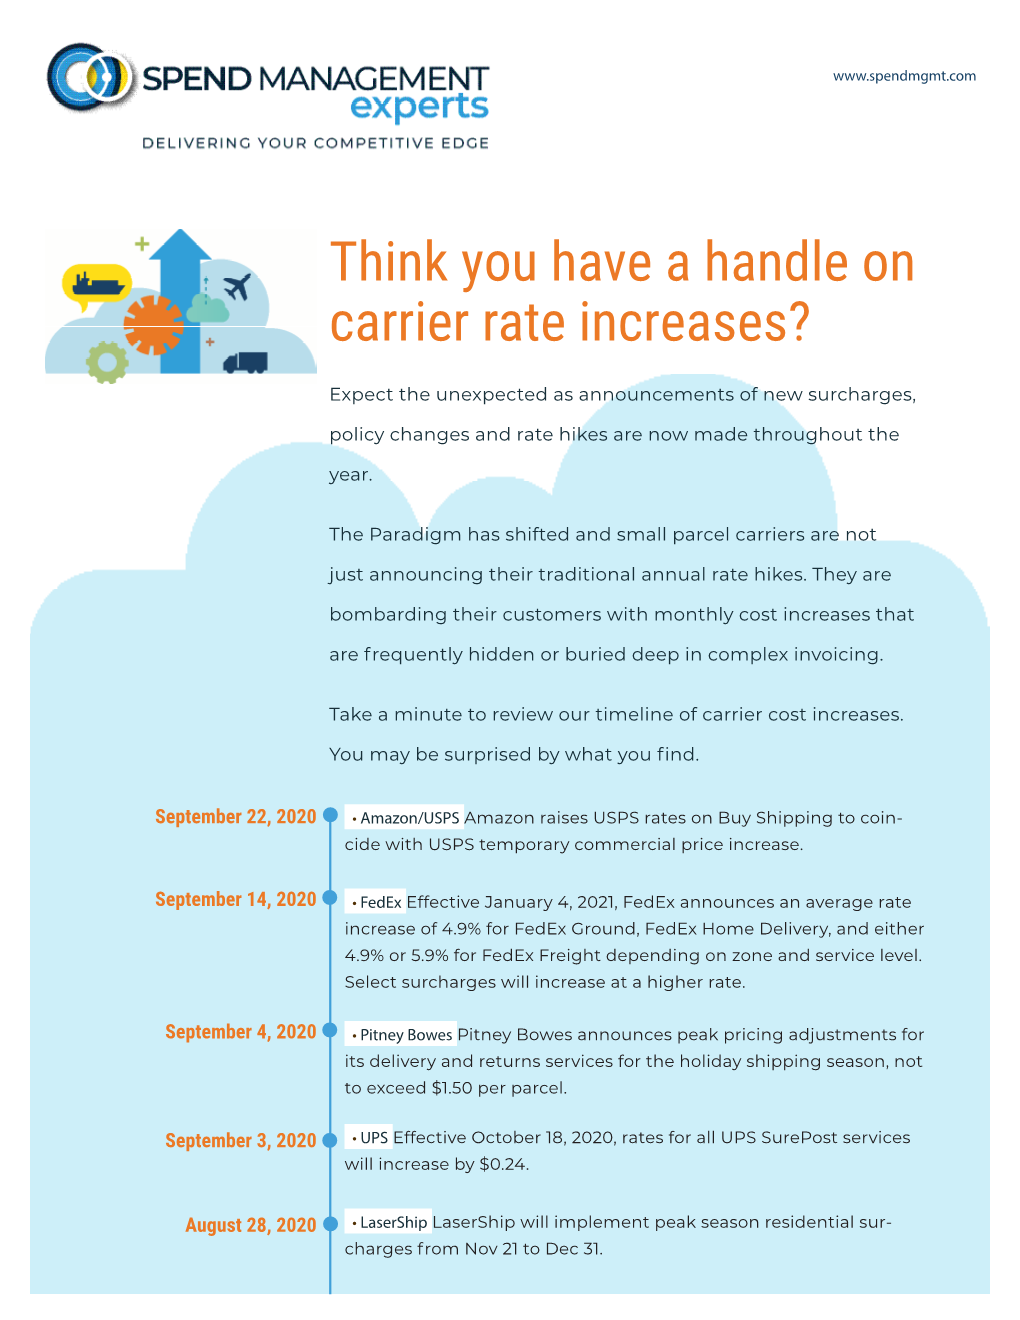 Think You Have a Handle on Carrier Rate Increases?